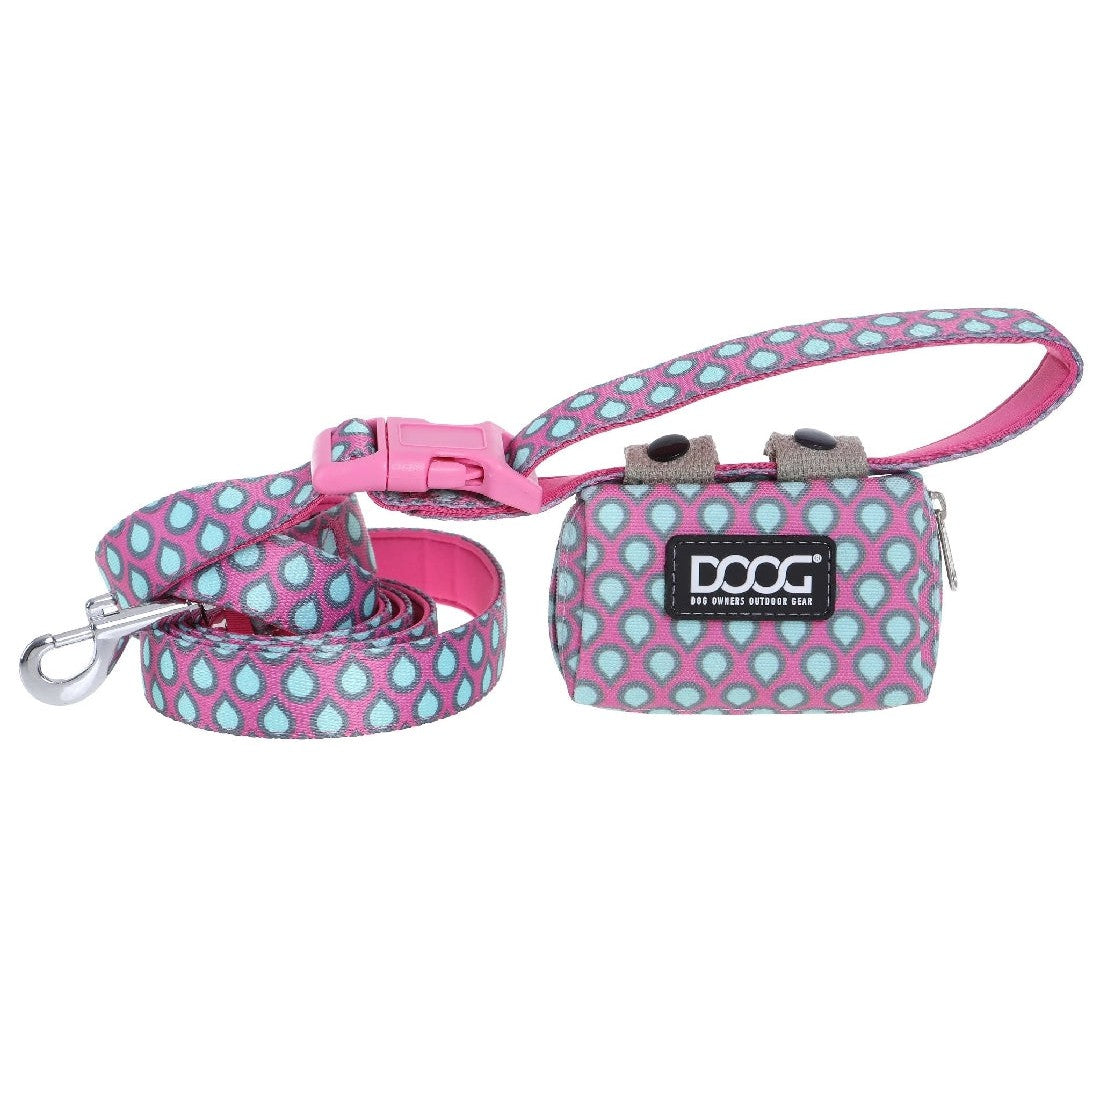 Doog Walkie Pouch Luna Pink With Tear Drops-Ascot Saddlery-The Equestrian